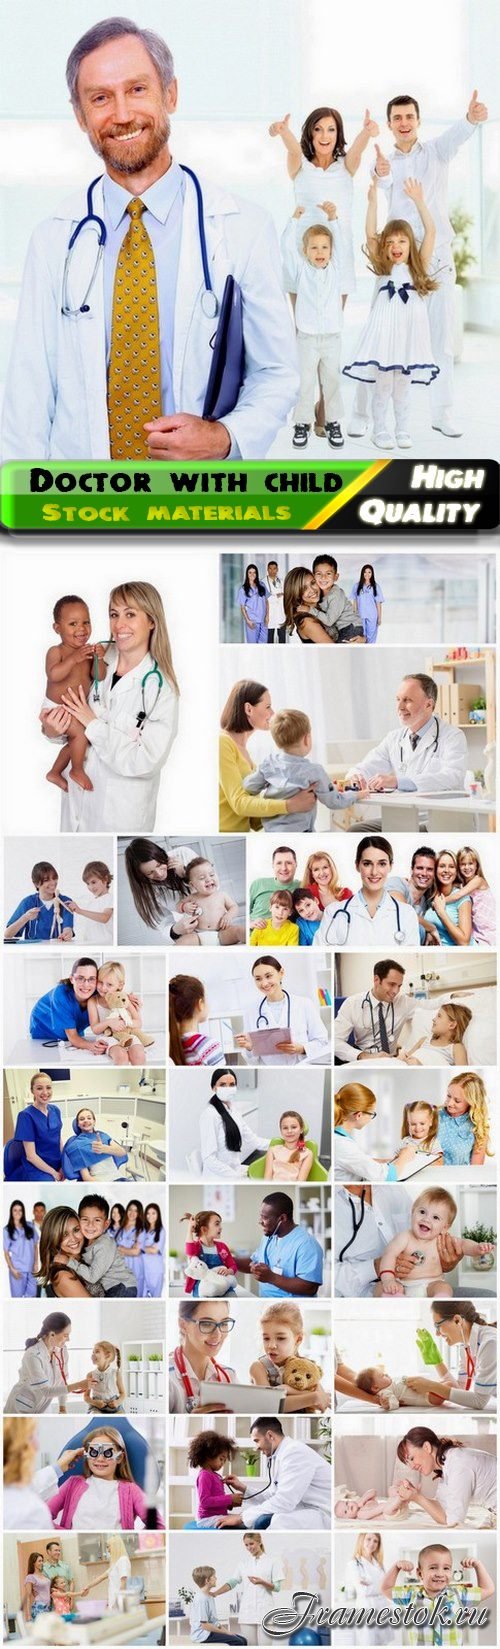 Smiling doctor with child and nurse with happy kid - 25 HQ Jpg